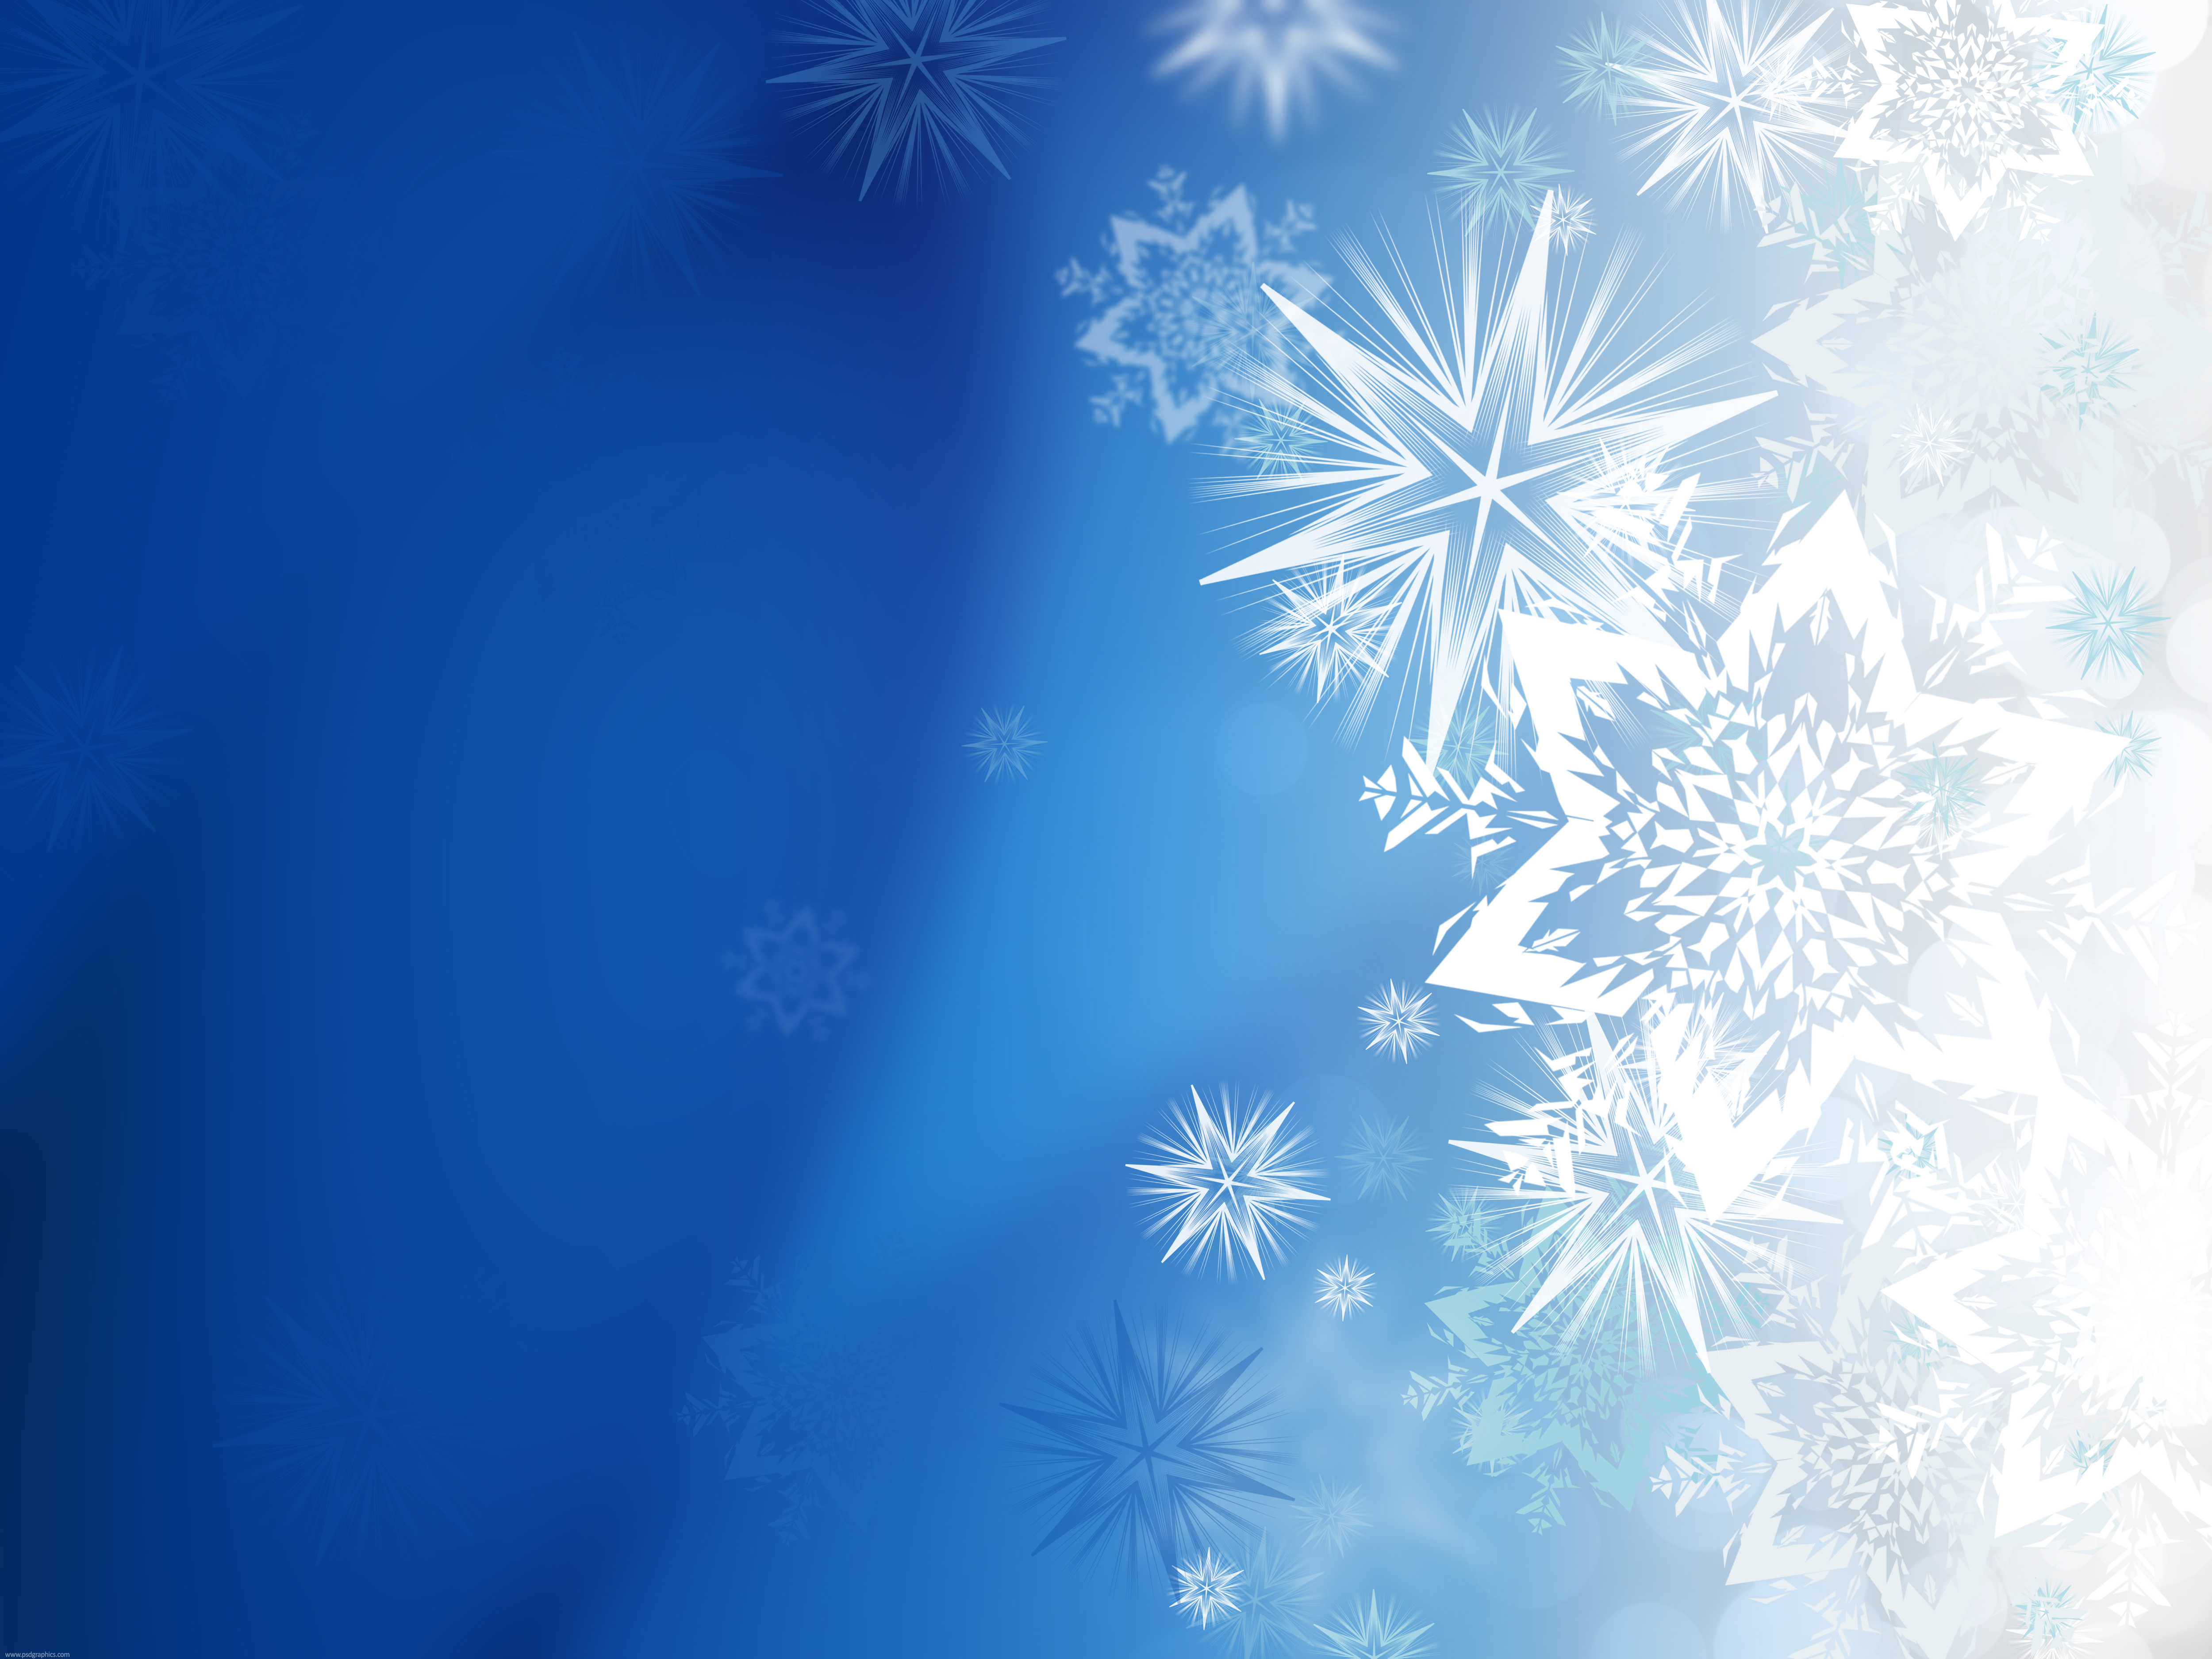 Background Xmas Snowflakes Abstract Winter Design Grungy